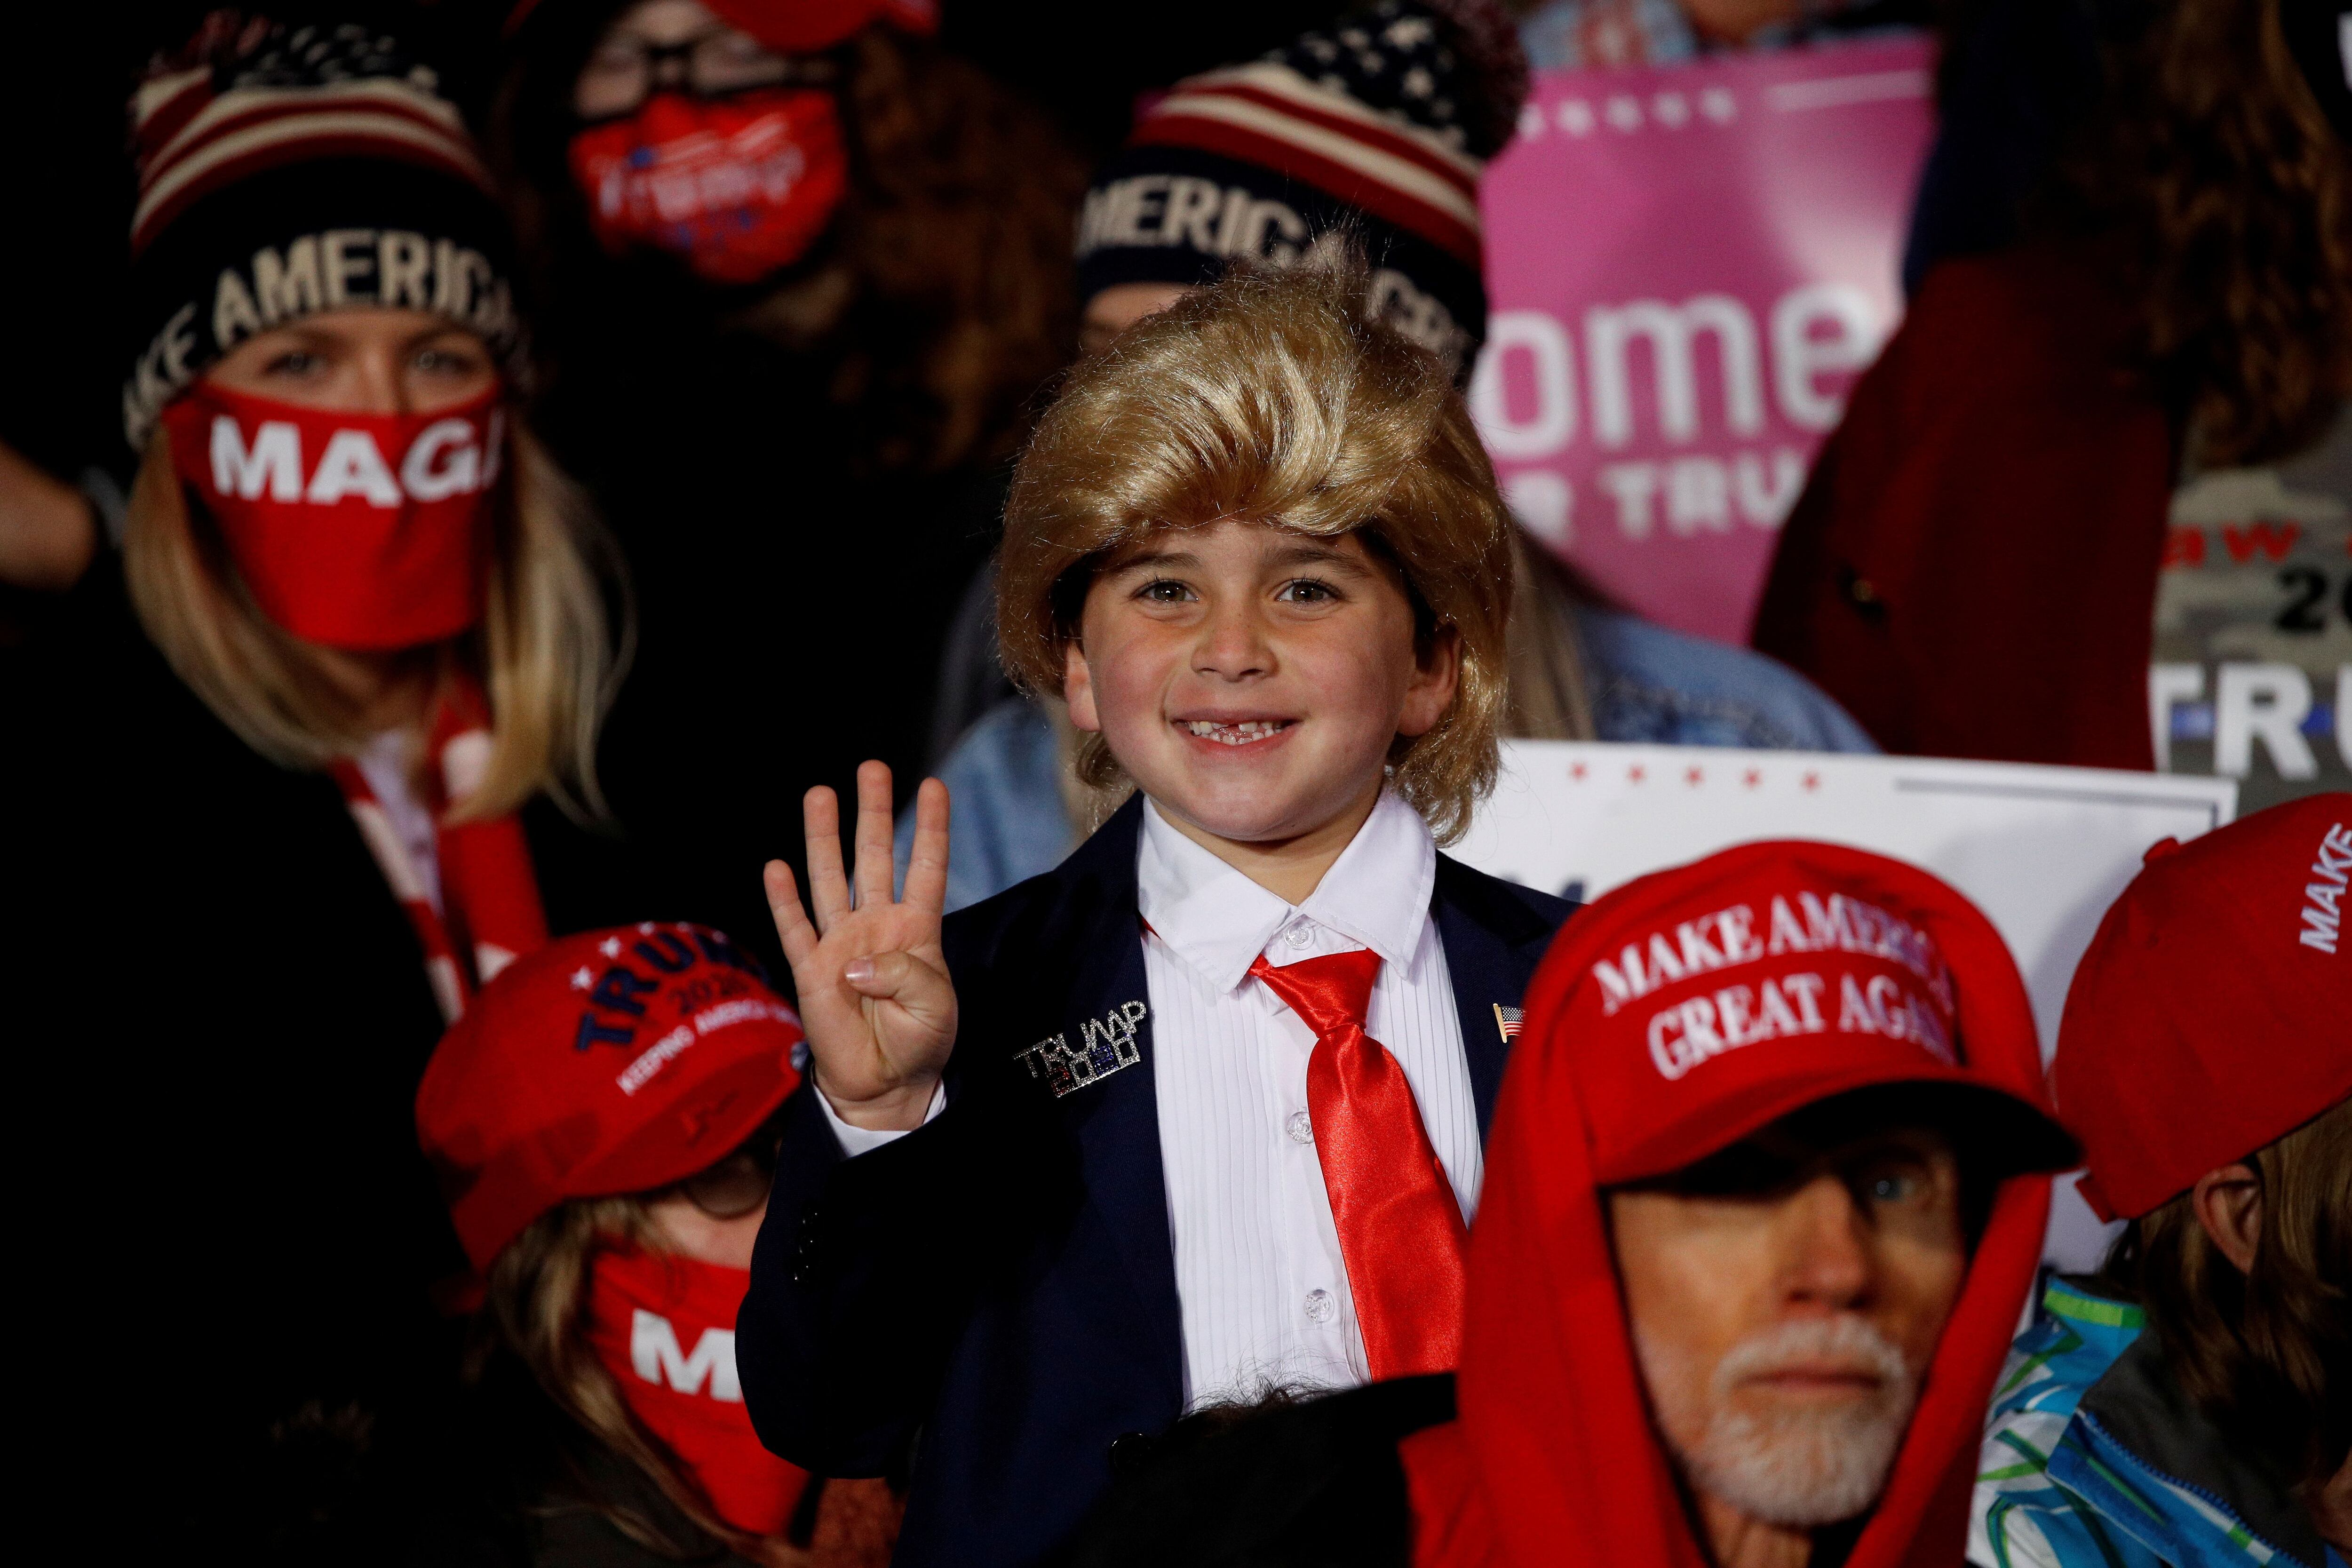 A boy in the audience holds up four fingers during U.S. President Donald Trump's campaign rally at Erie International Airport in Erie, Pennsylvania, U.S., October 20, 2020. REUTERS/Tom Brenner TPX IMAGES OF THE DAY